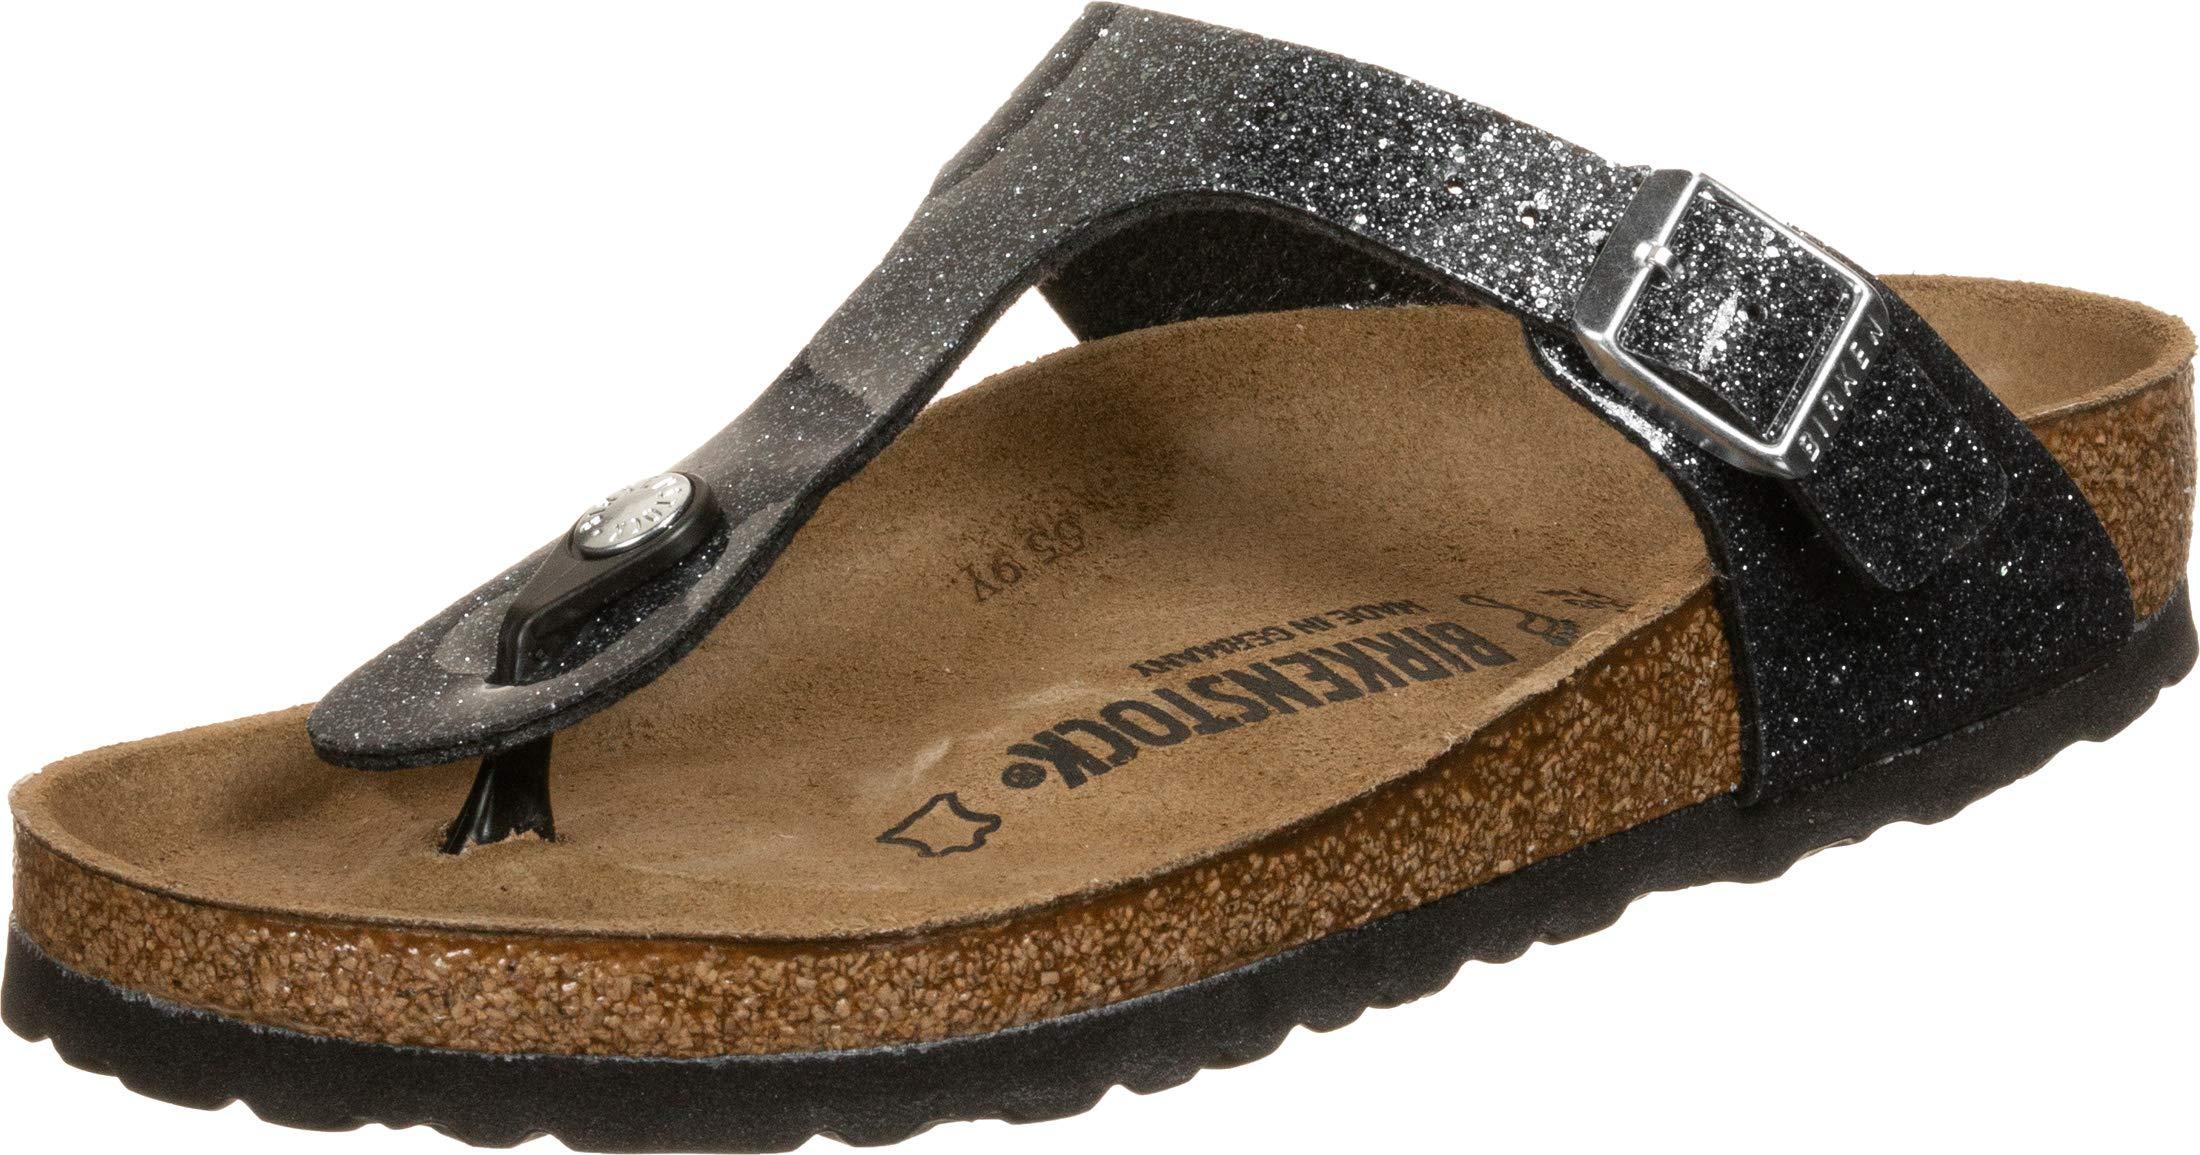 Birkenstock Gizeh Bf W Thong Sandals Cs Anthracite in Grey - Save 43% - Lyst